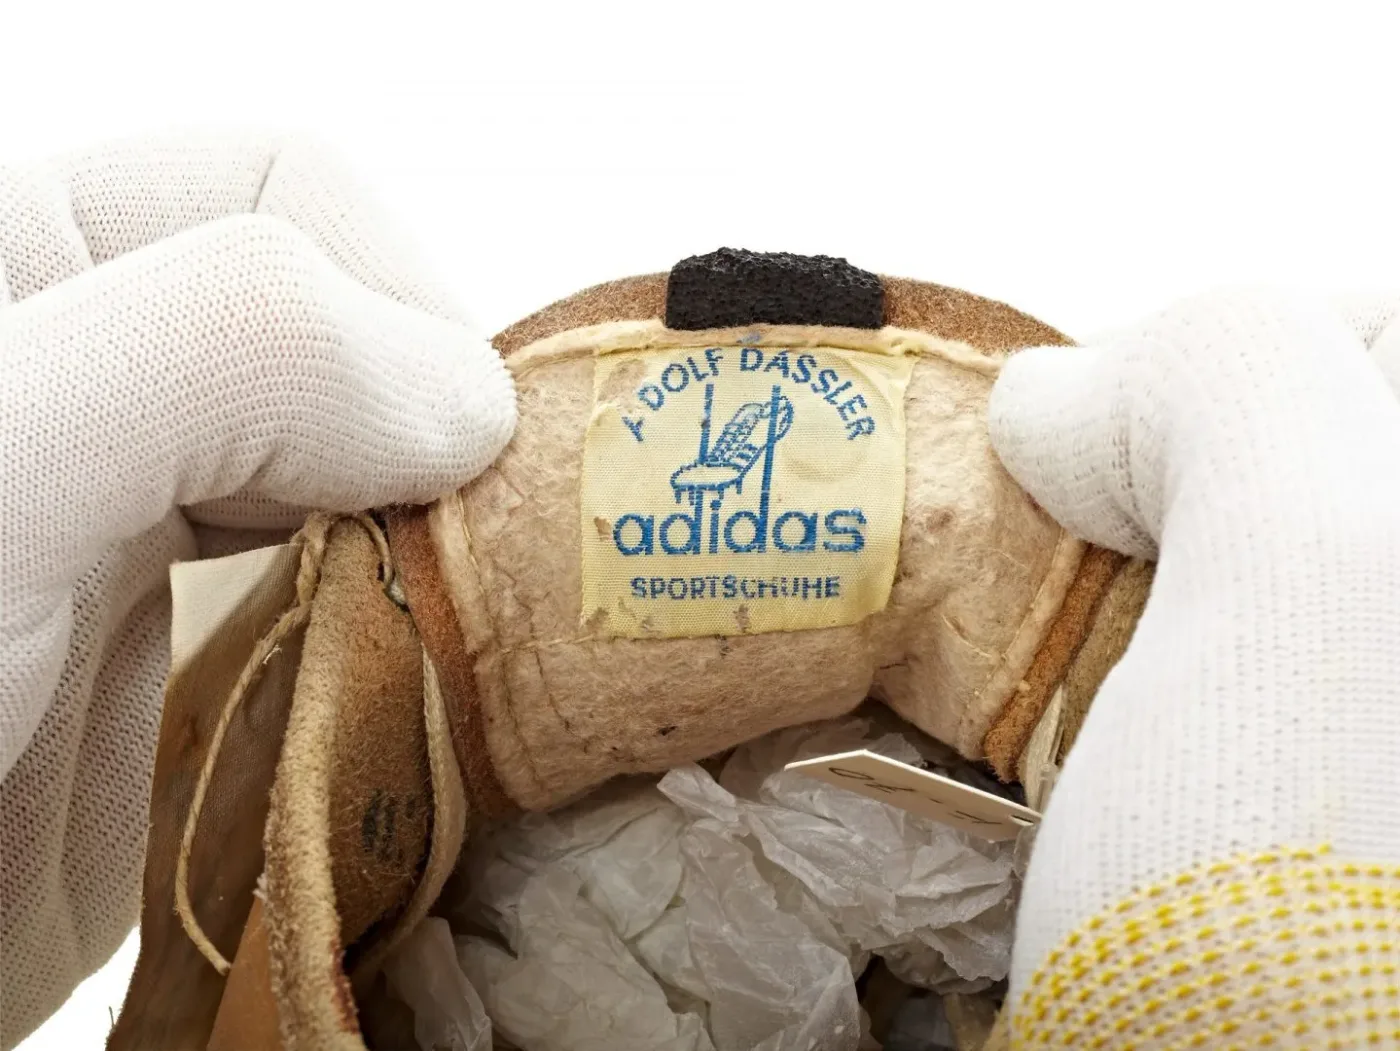 The History of adidas: A Background of Collaboration and Innovation